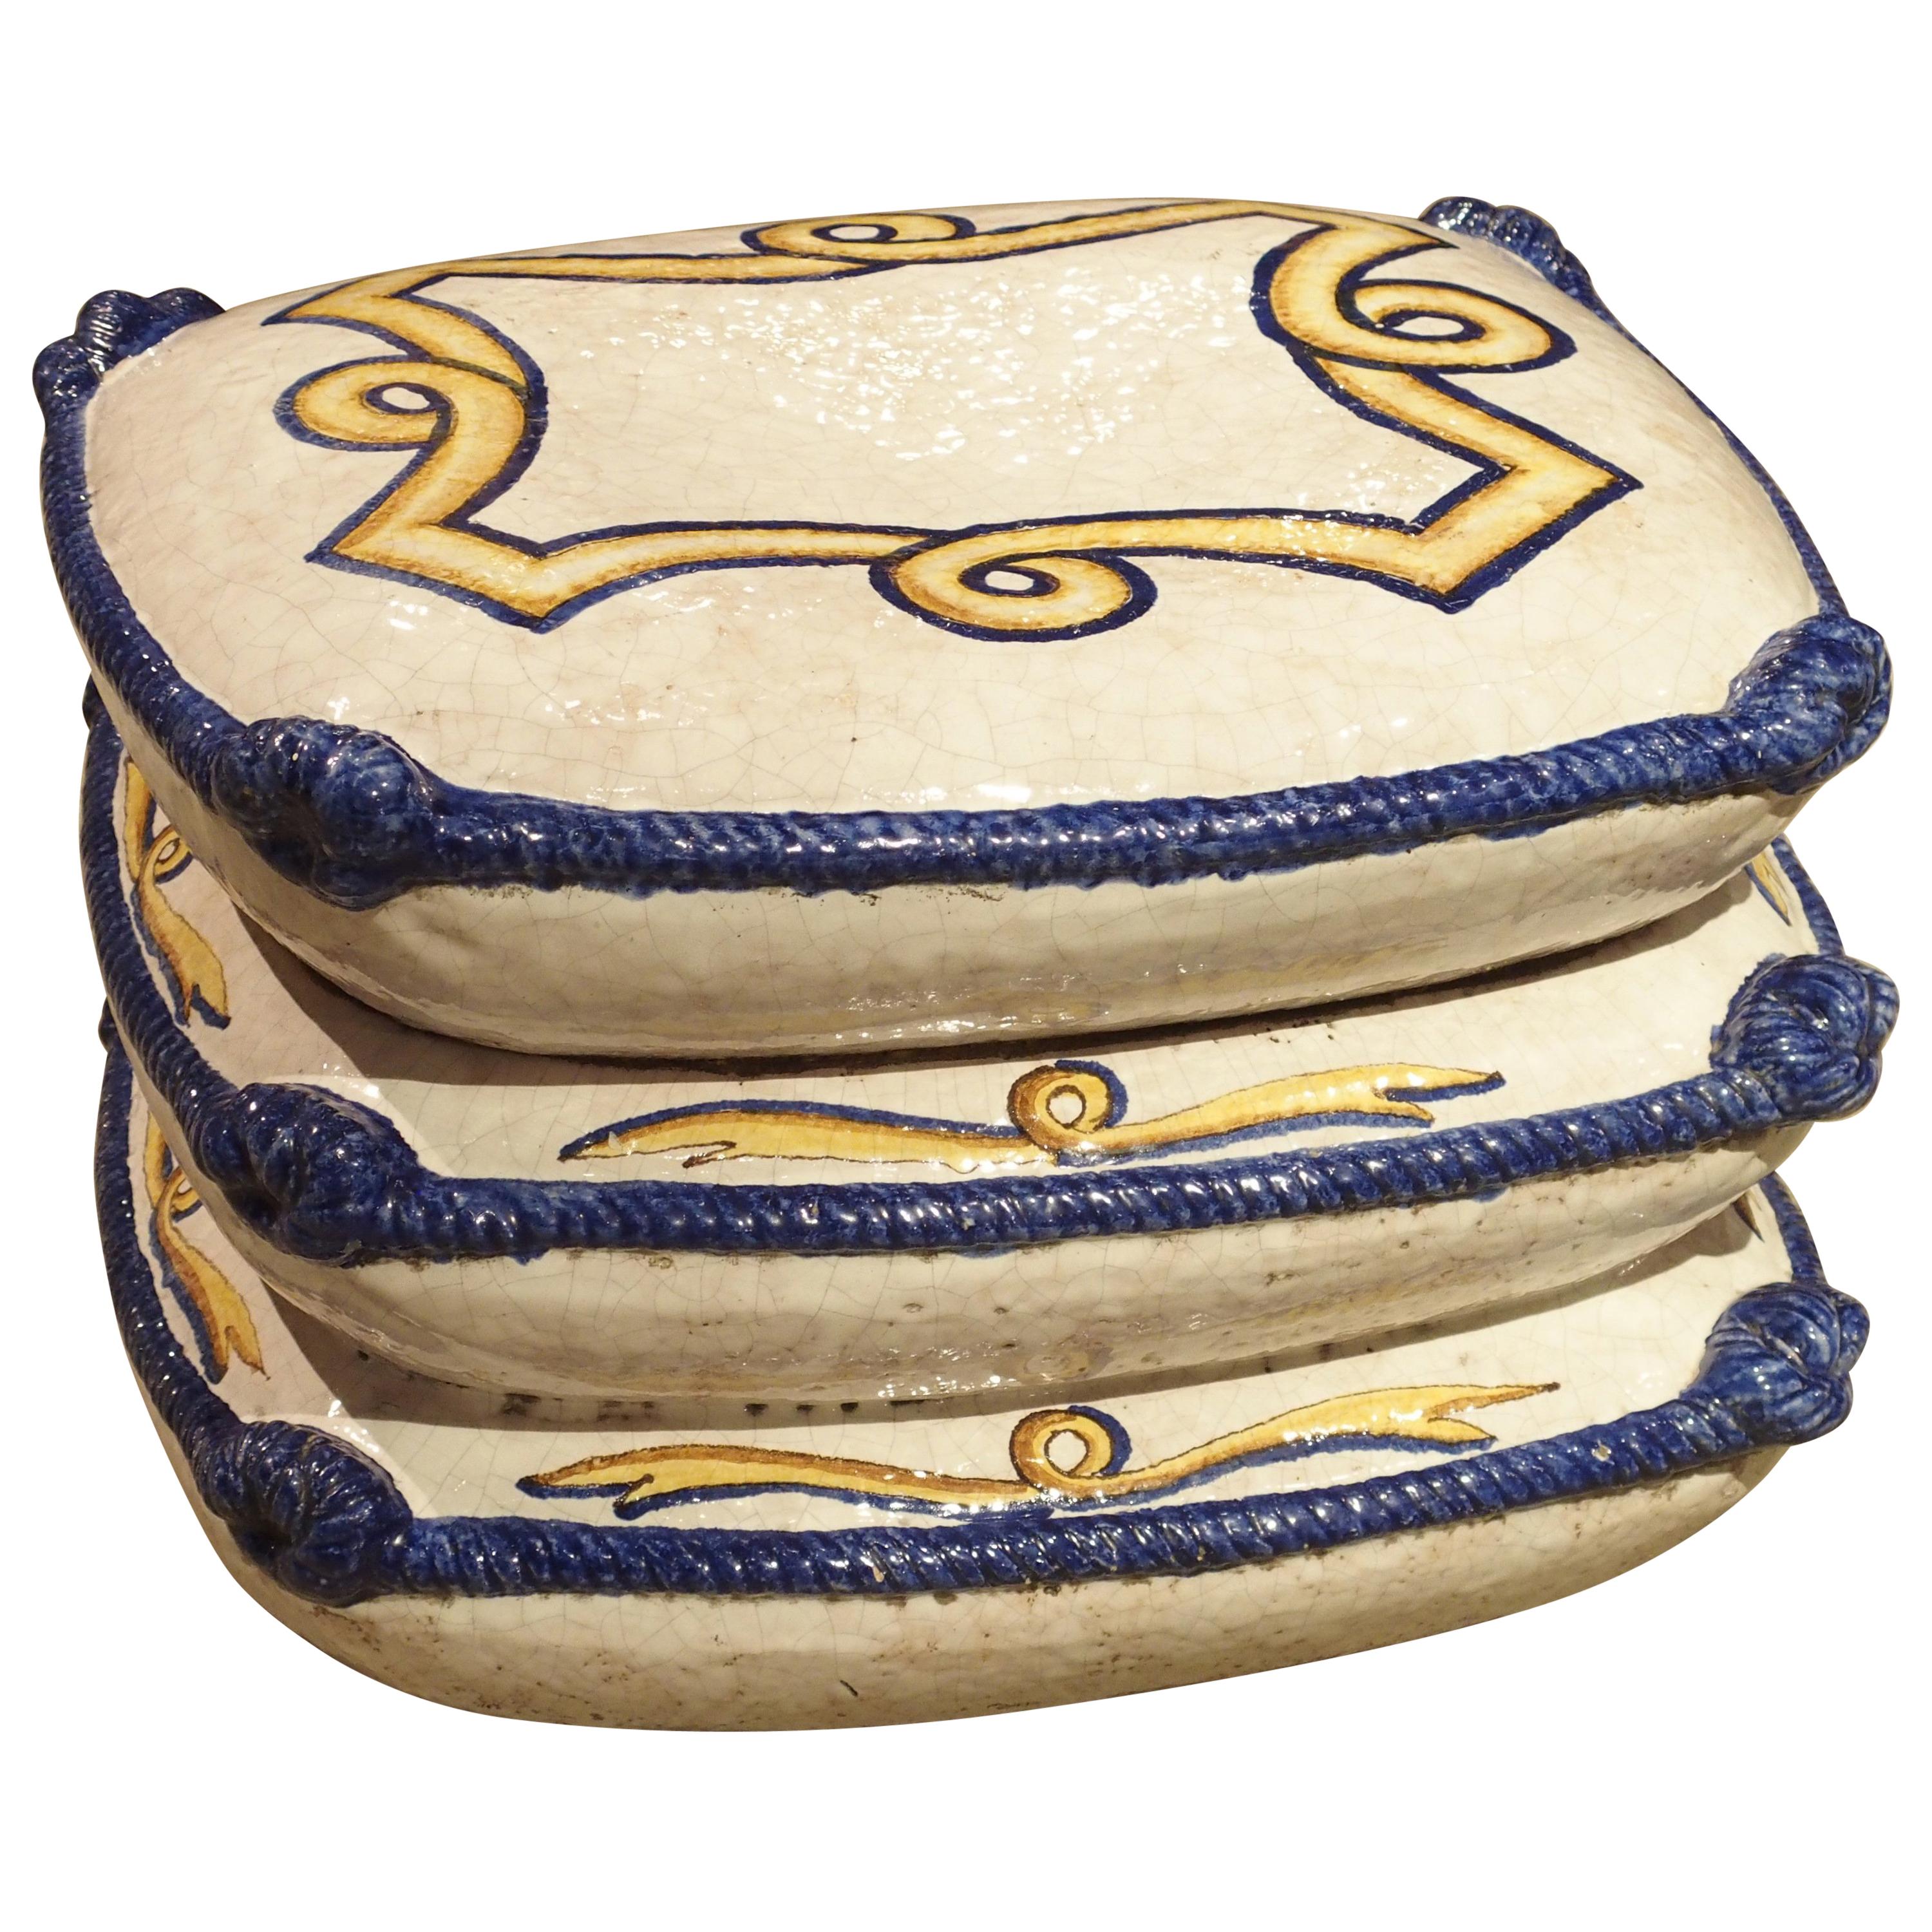 Decorative Glazed Terracotta Pillow Stack from Italy, 1940s